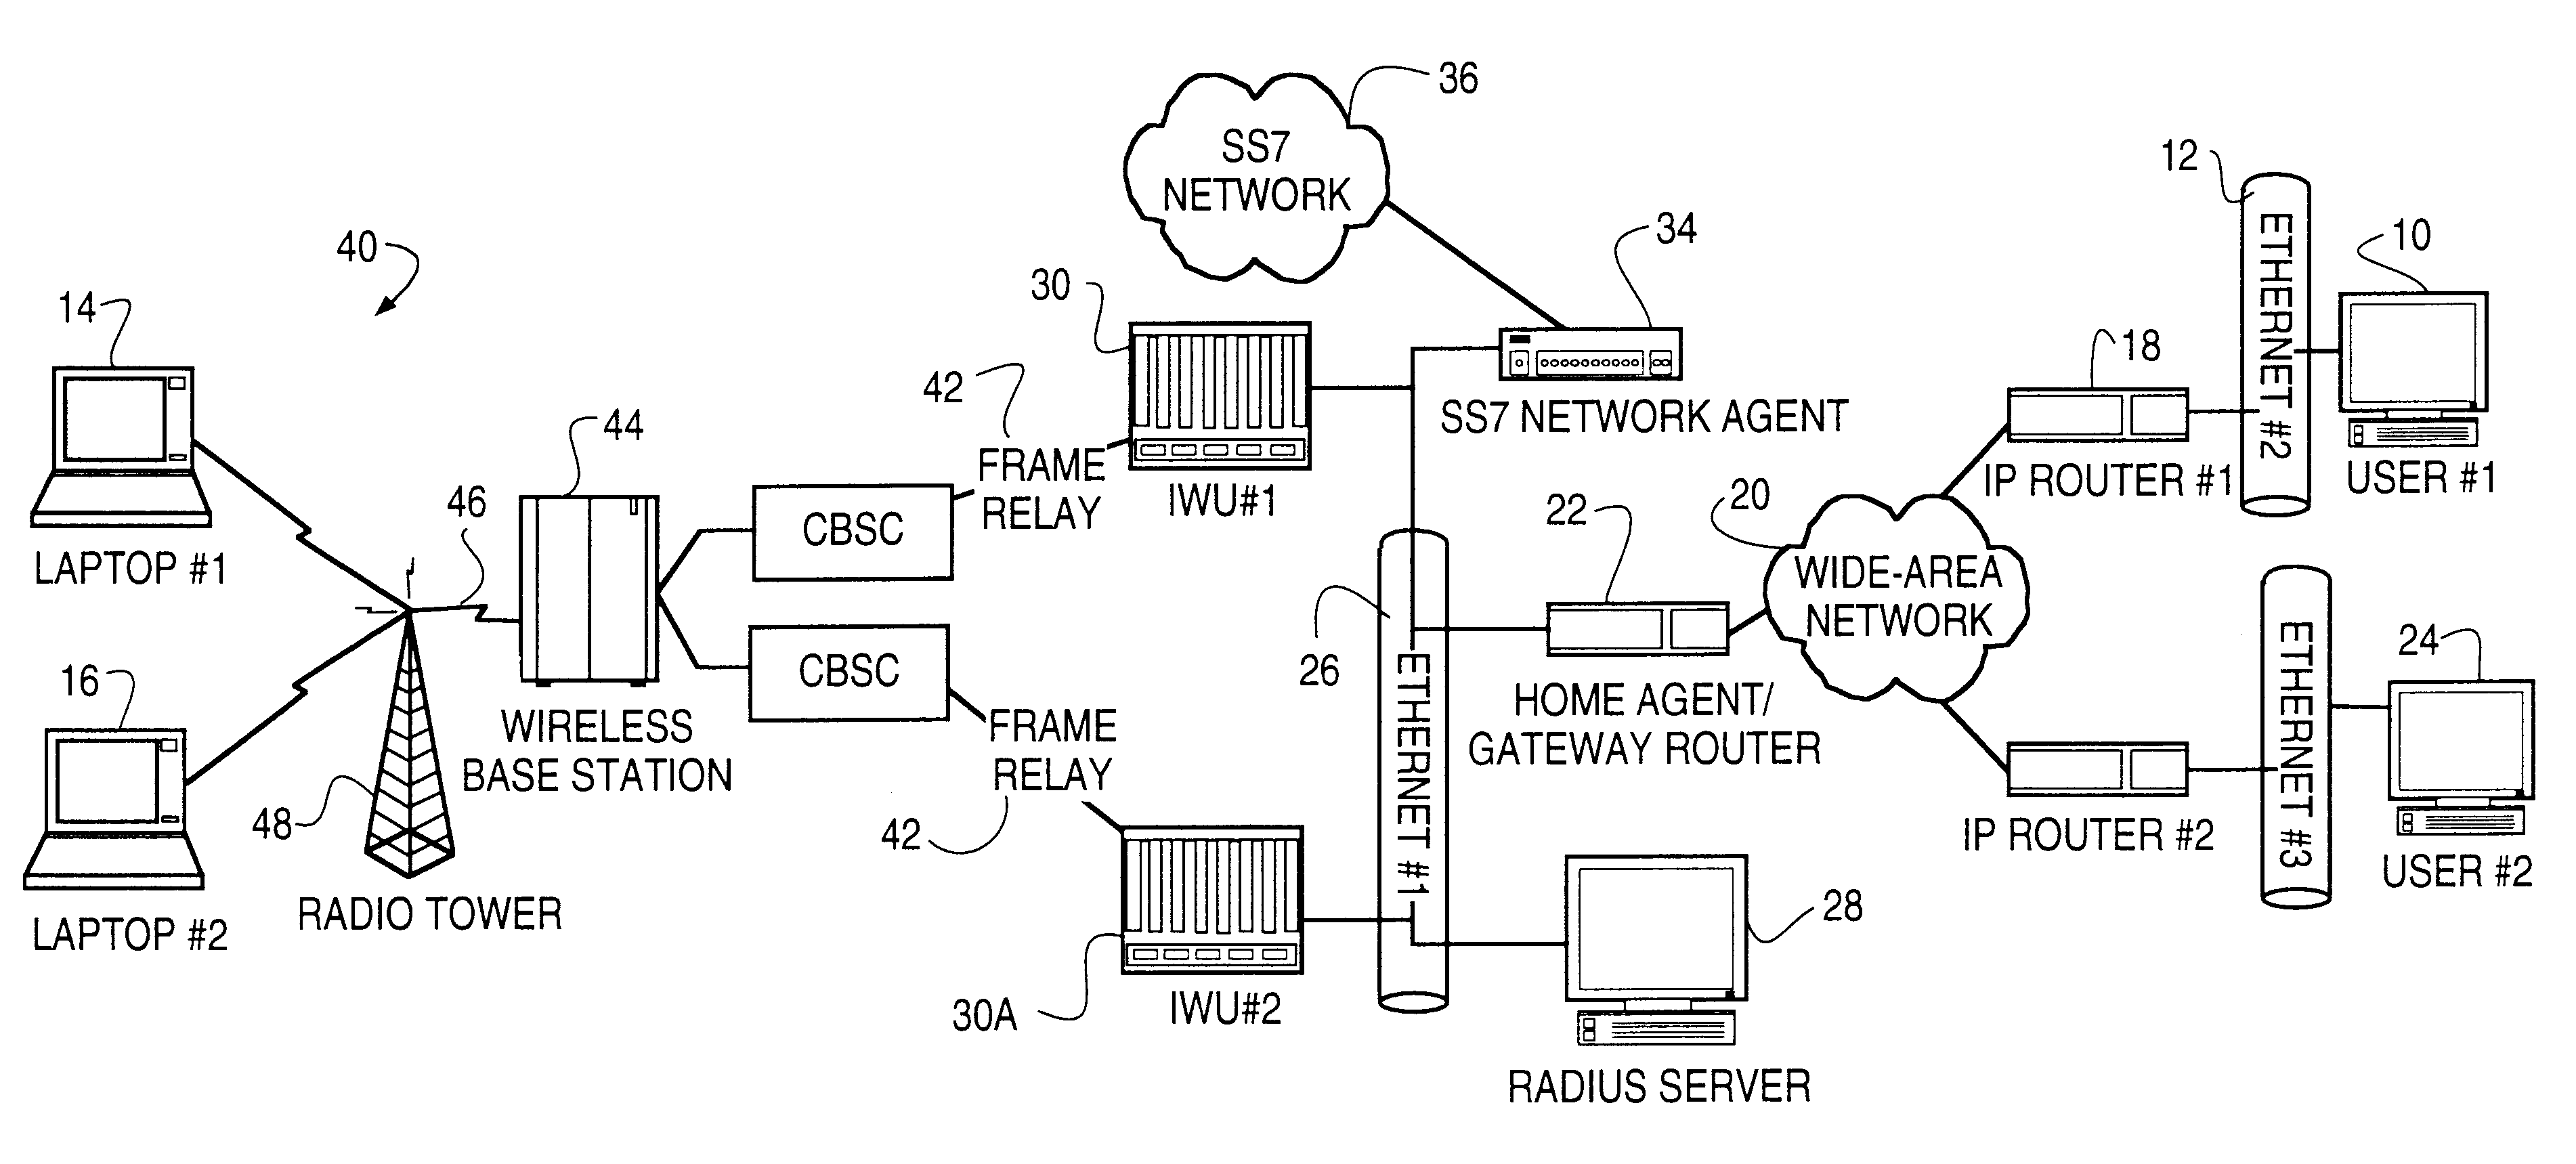 Radius-based mobile internet protocol (IP) address-to-mobile identification number mapping for wireless communication